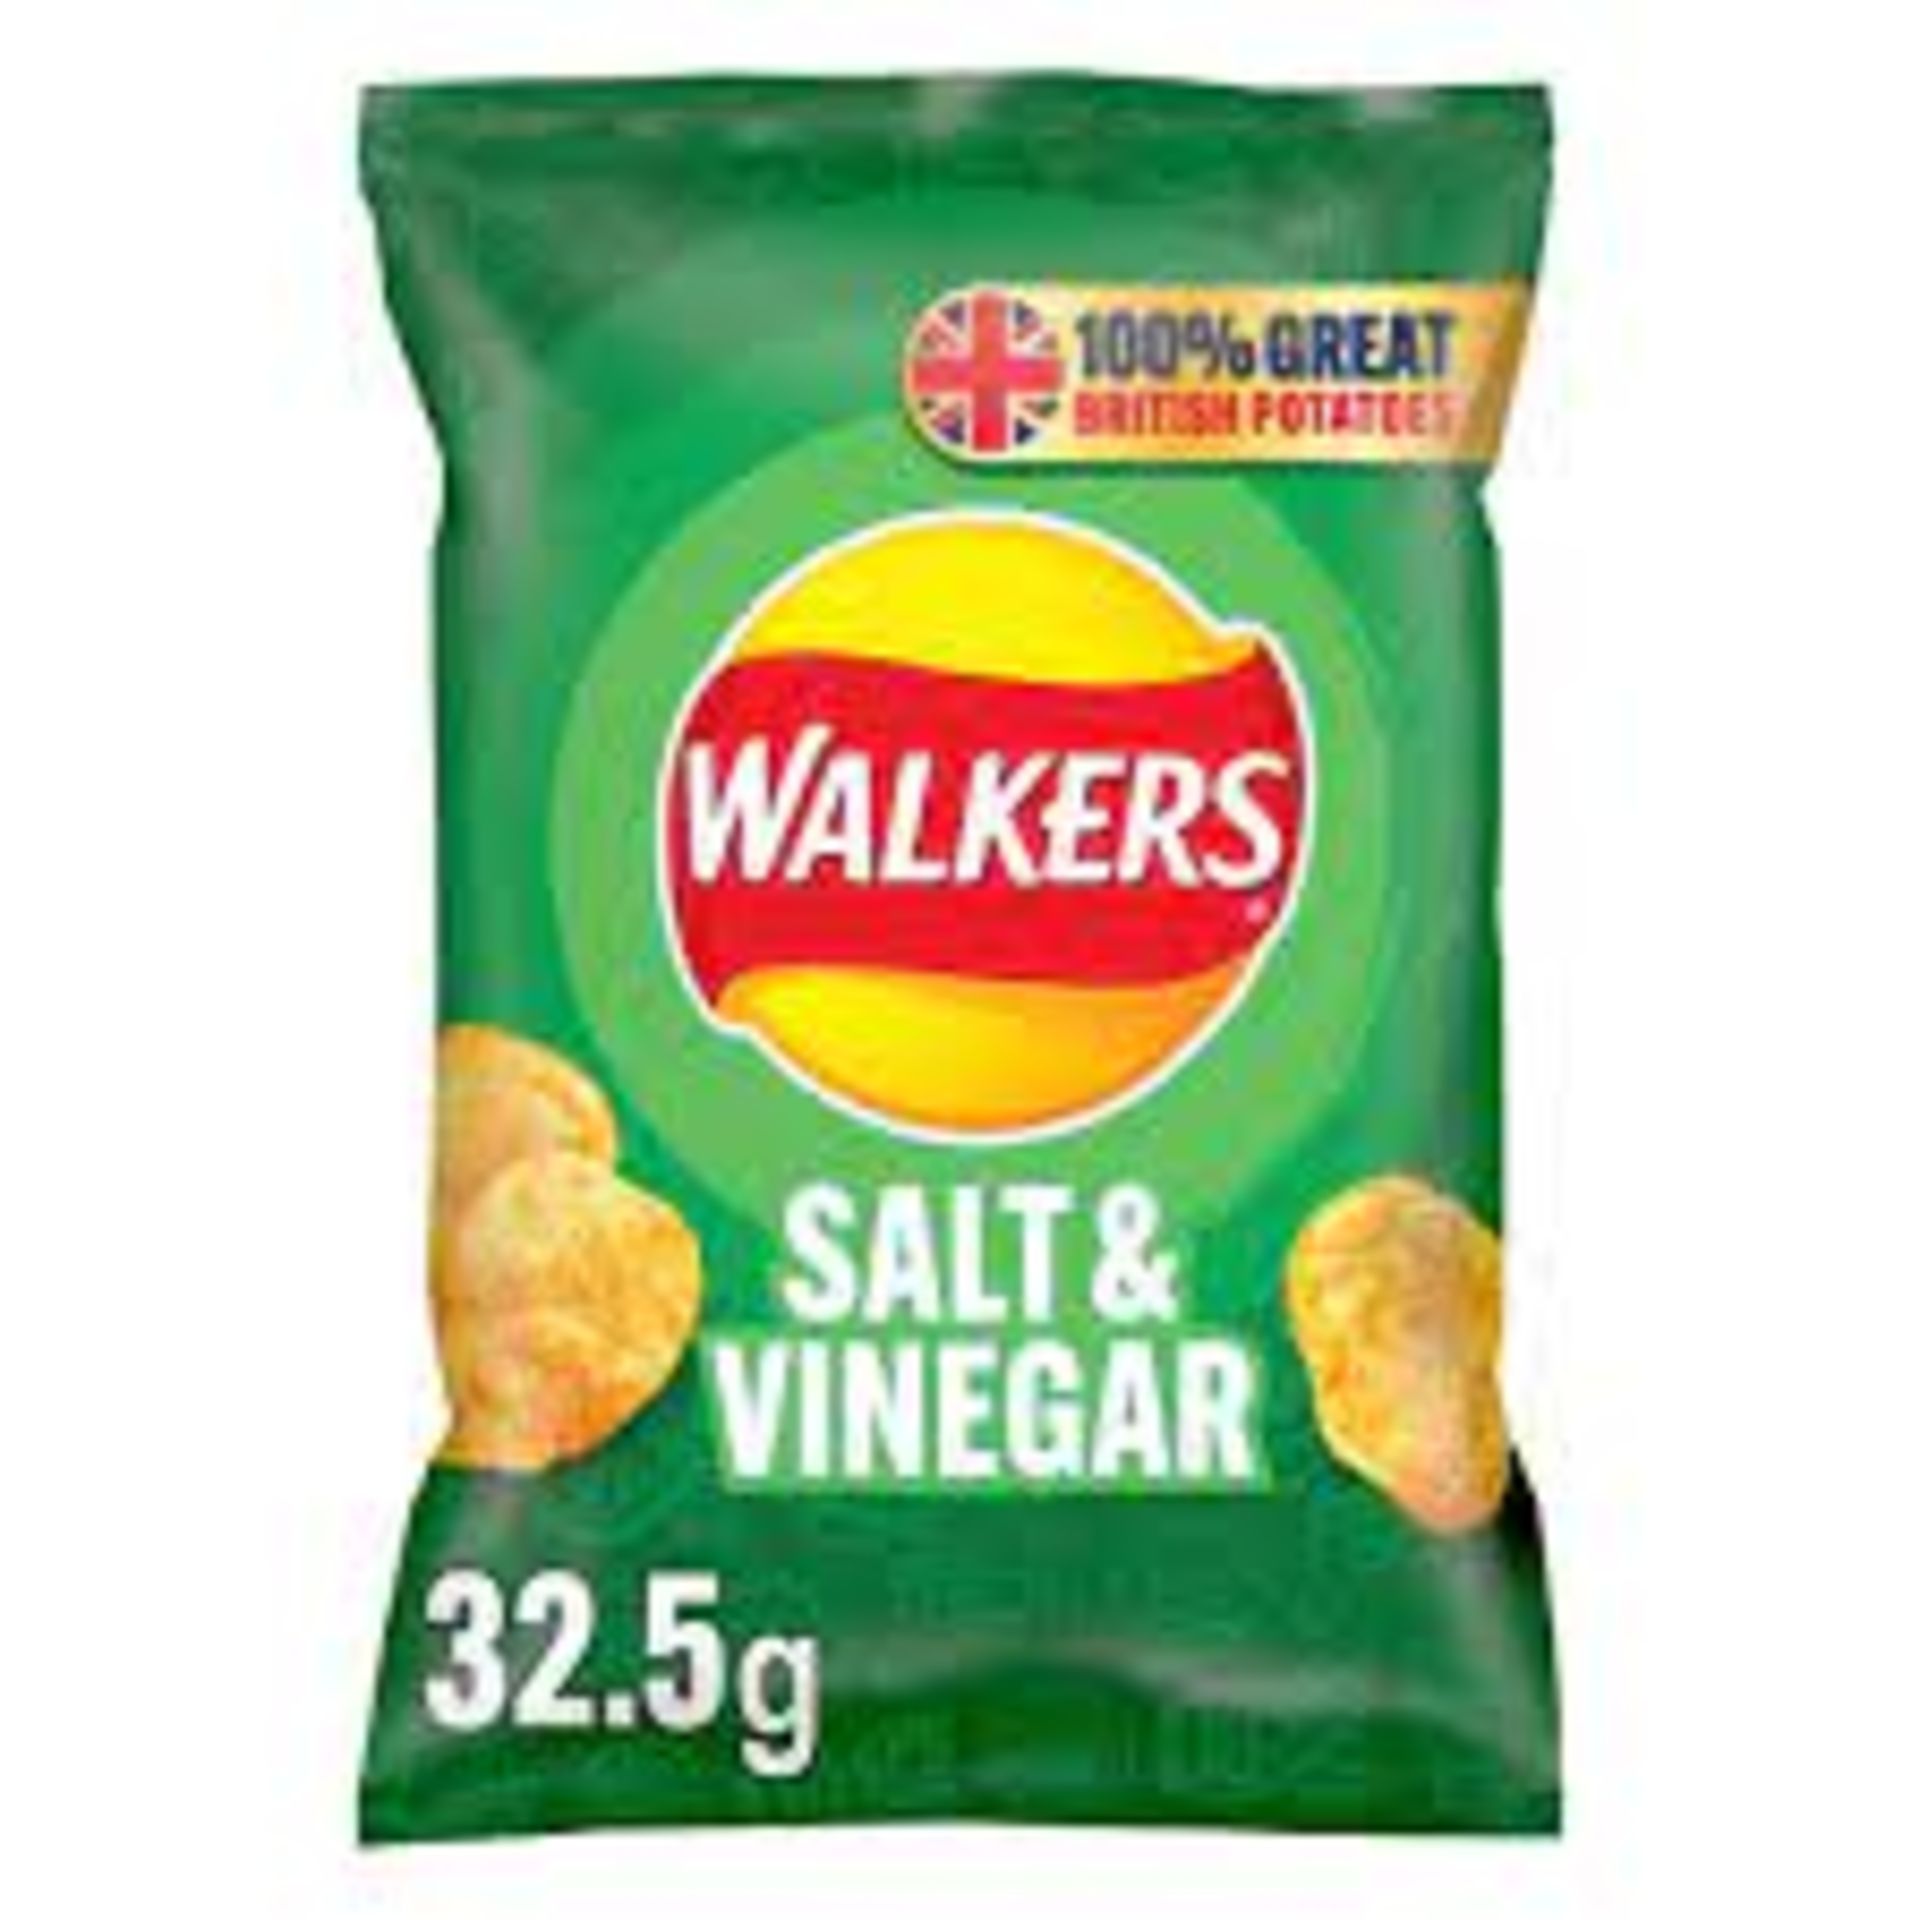 RRP £303 (Approx 15)(A70)spW14a3350H   15 x Walkers Salt and Vinegar Crisps, 32.5g (Case of 32) 18/